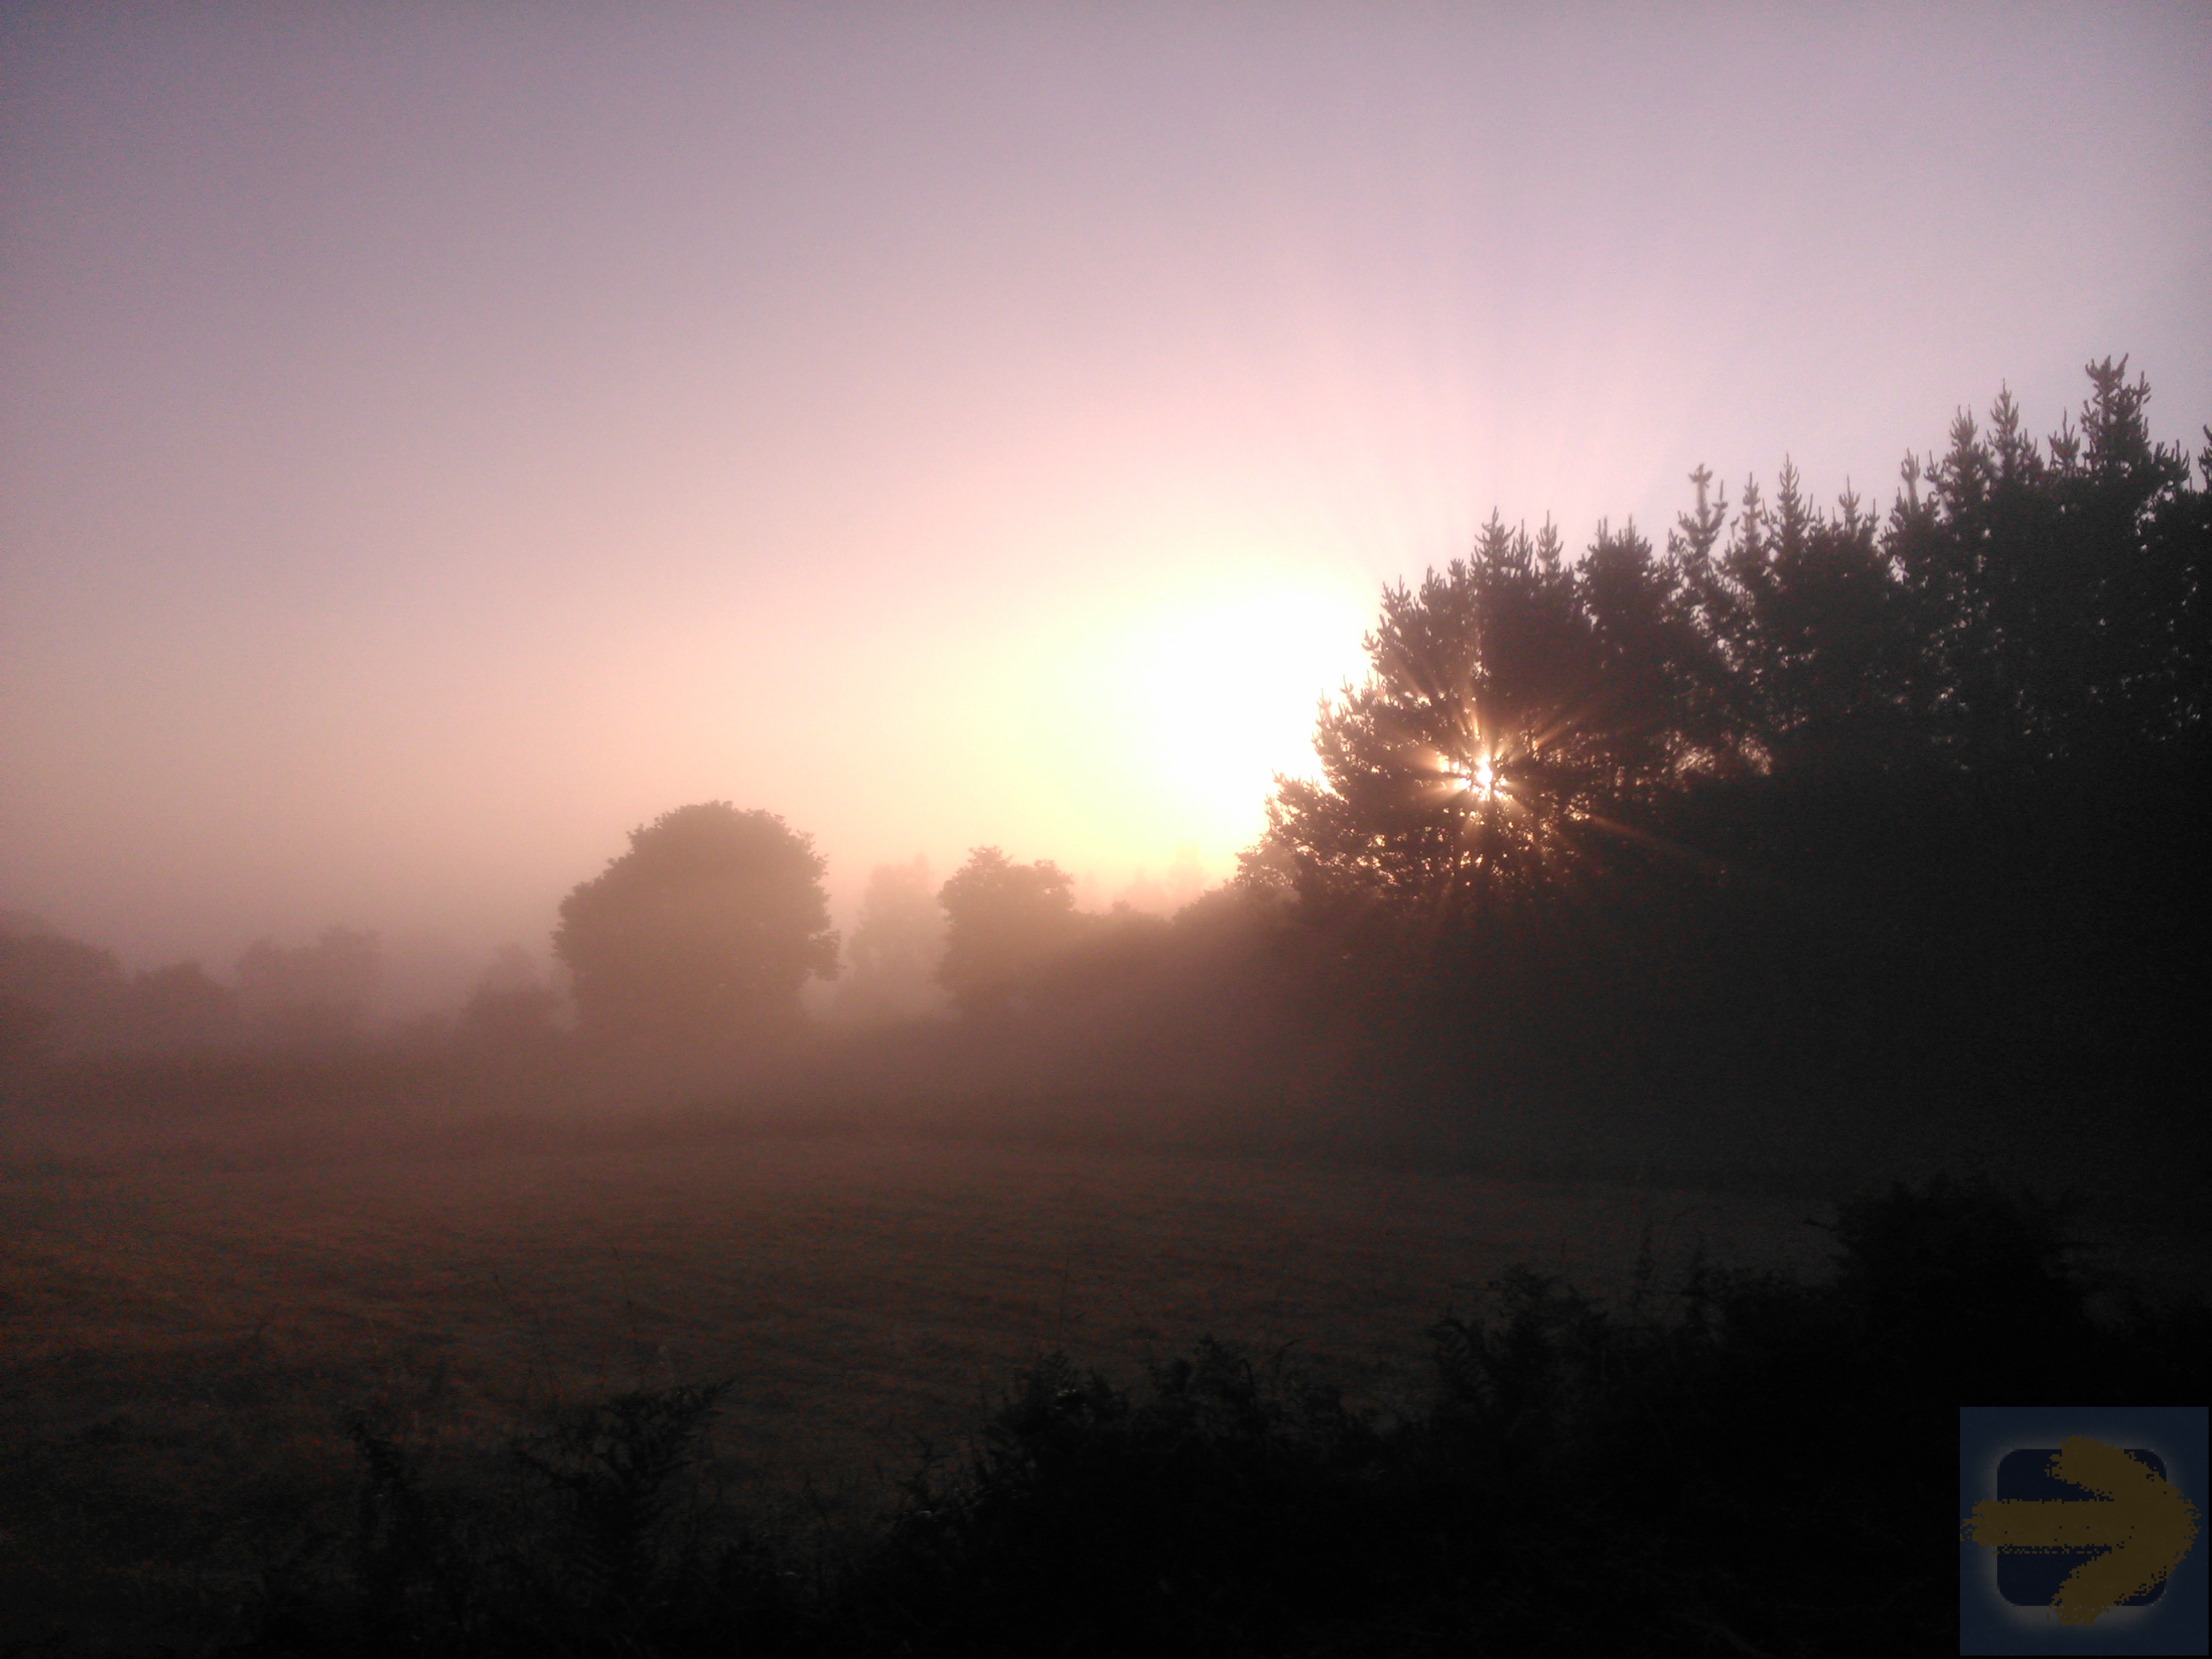 Misty morning in Galicia - August 2014